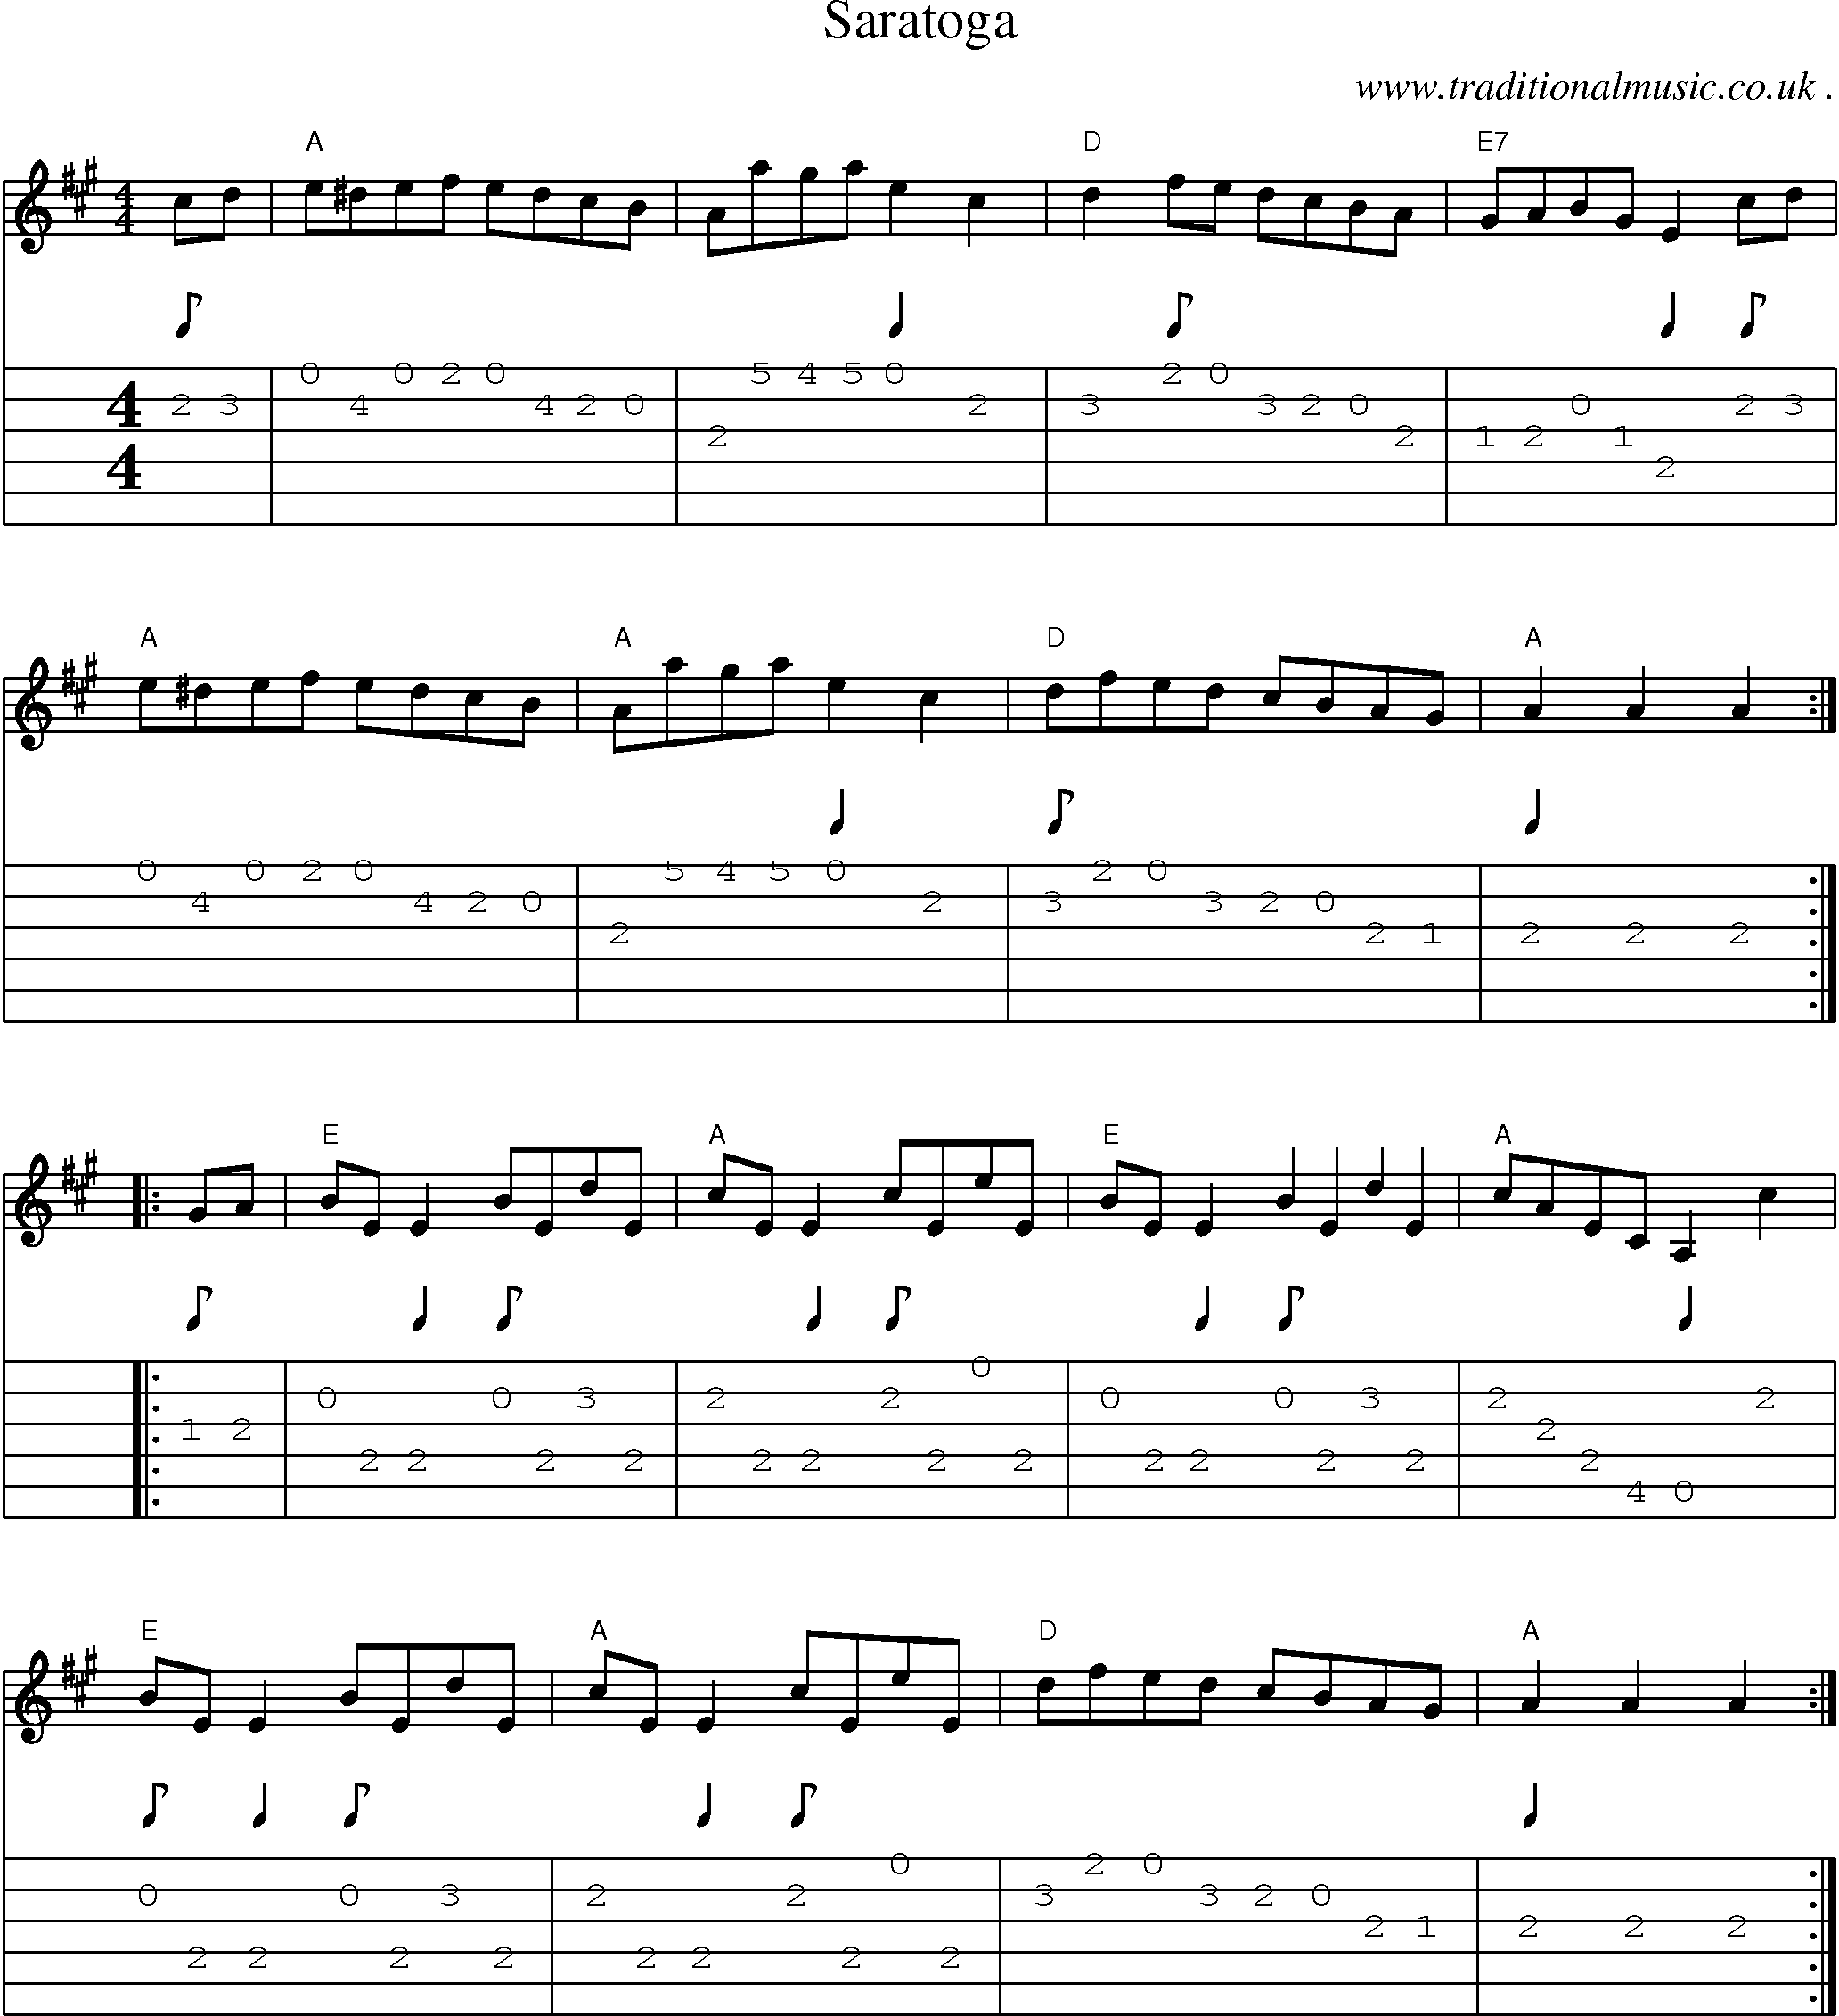 Music Score and Guitar Tabs for Saratoga